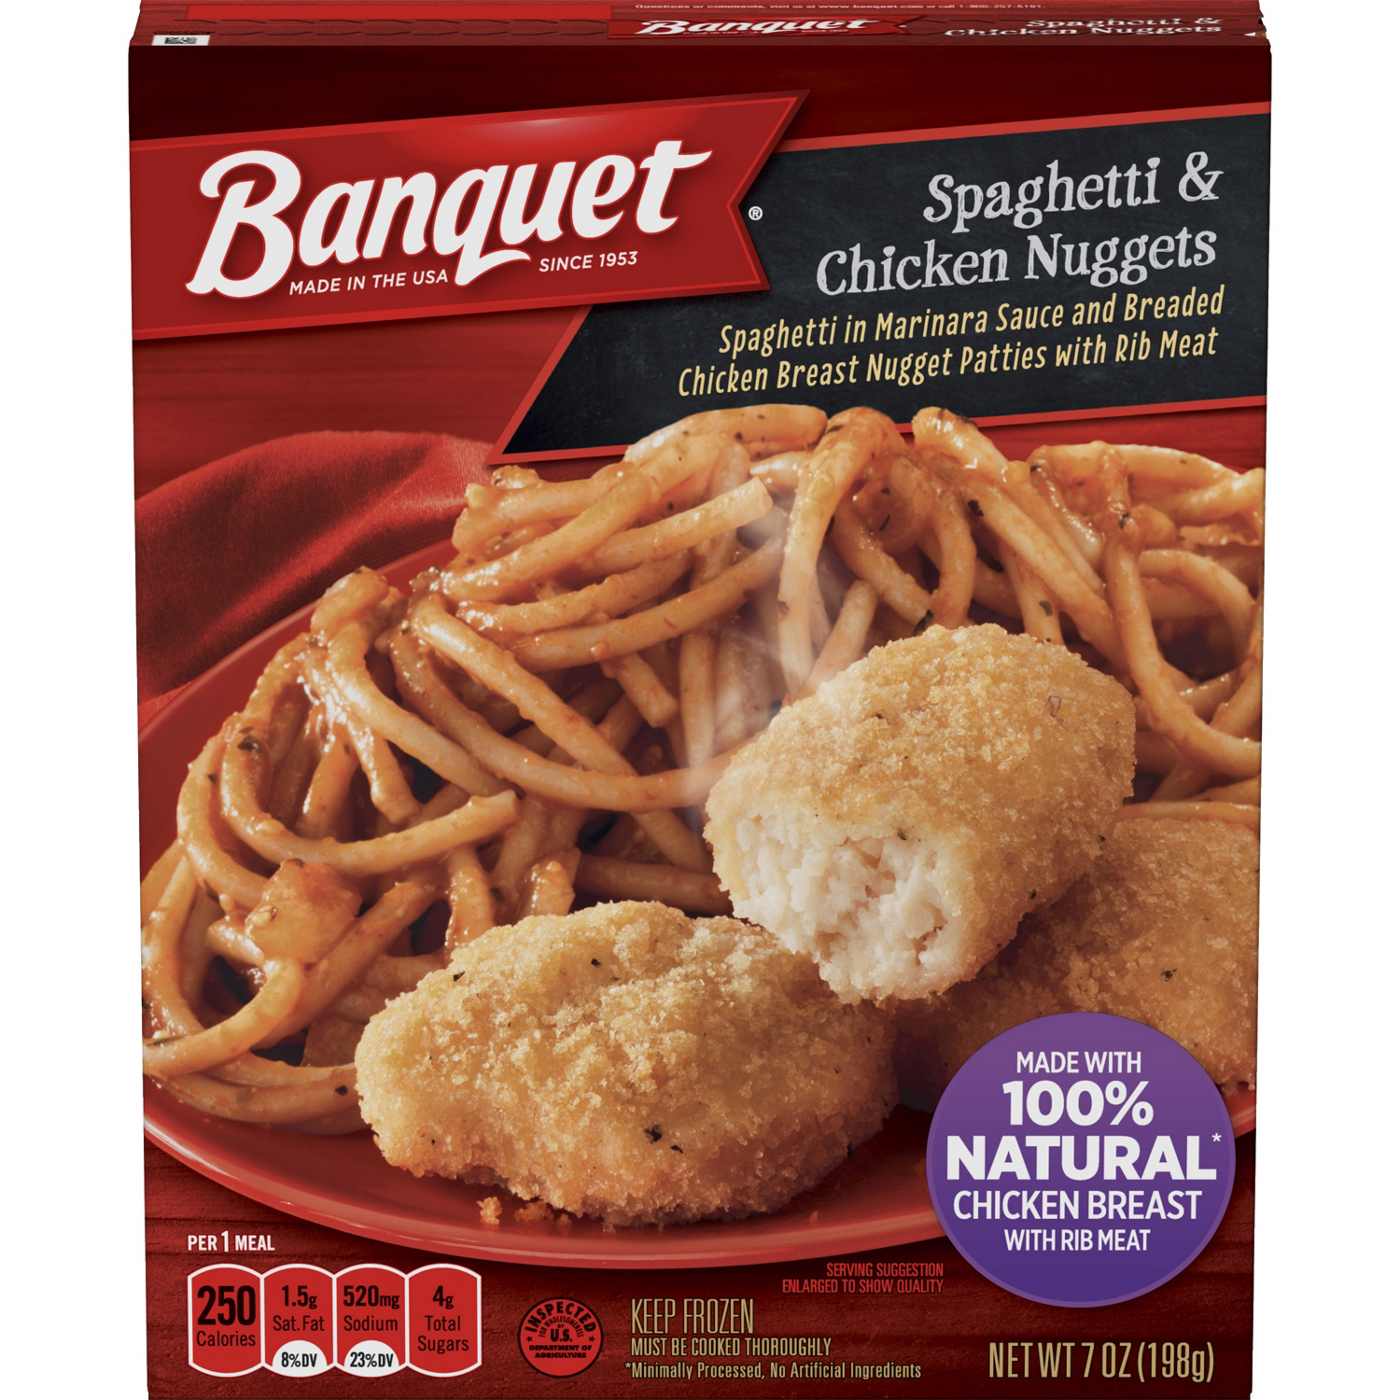 Banquet Spaghetti & Chicken Nuggets; image 1 of 4